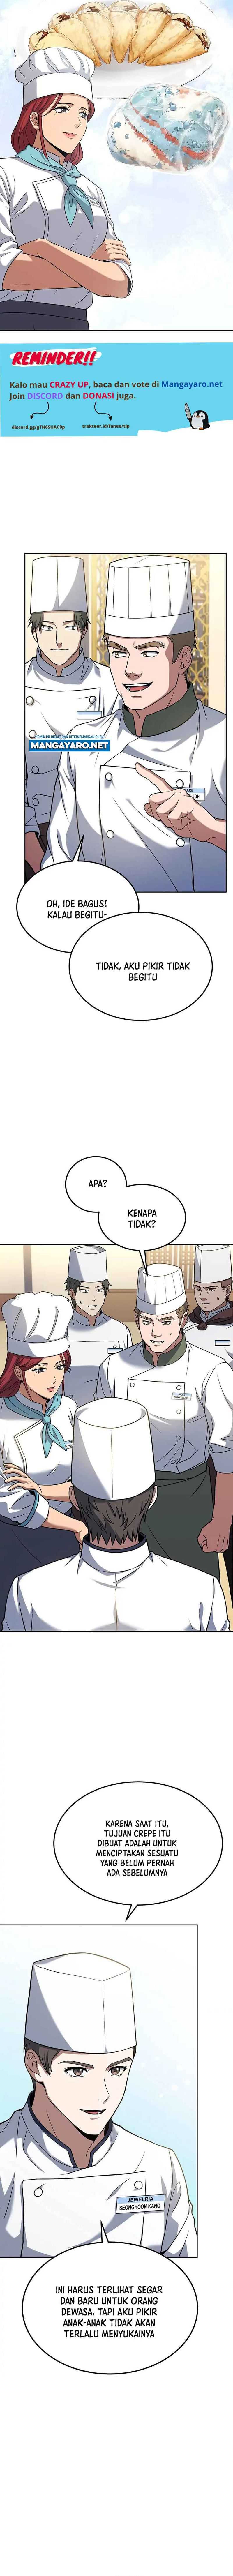 Youngest Chef From the 3rd Rate Hotel Chapter 60